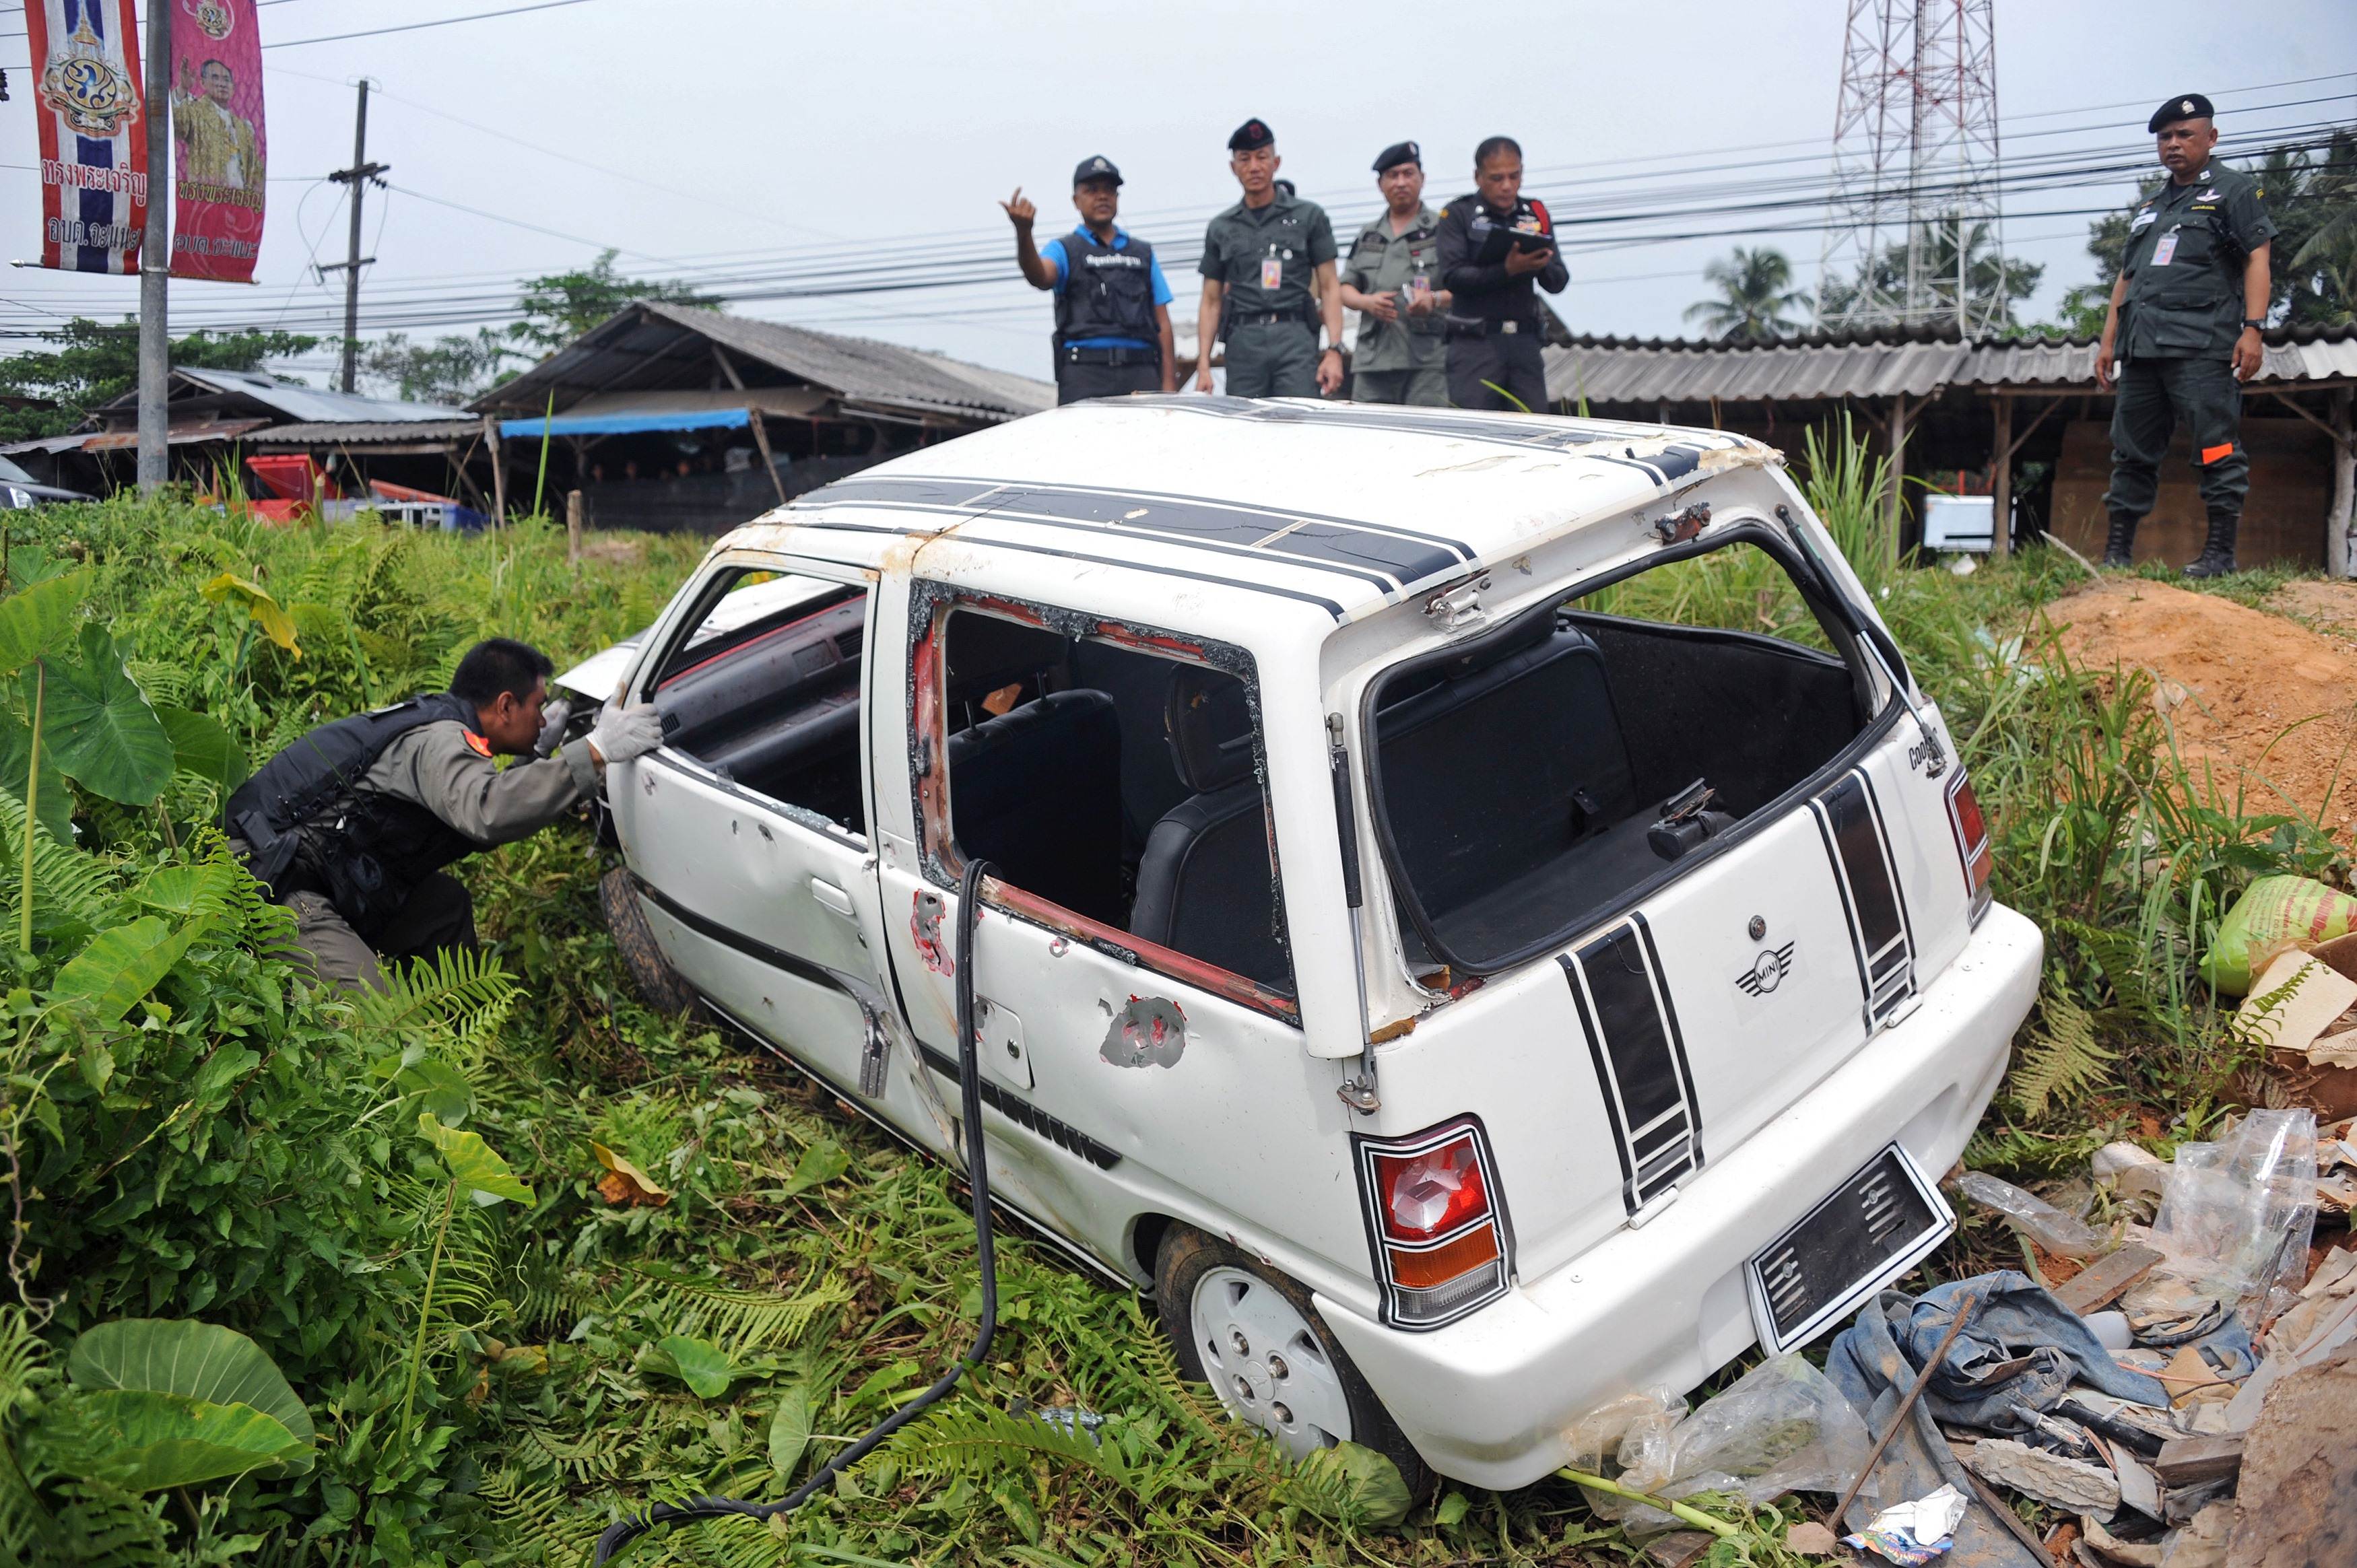 Thai bomb squad units inspect the site of a roadside bomb blast where two Muslim teachers were killed in an attack by suspected militants in Thailand's southern province of Narathiwat. Photo: 